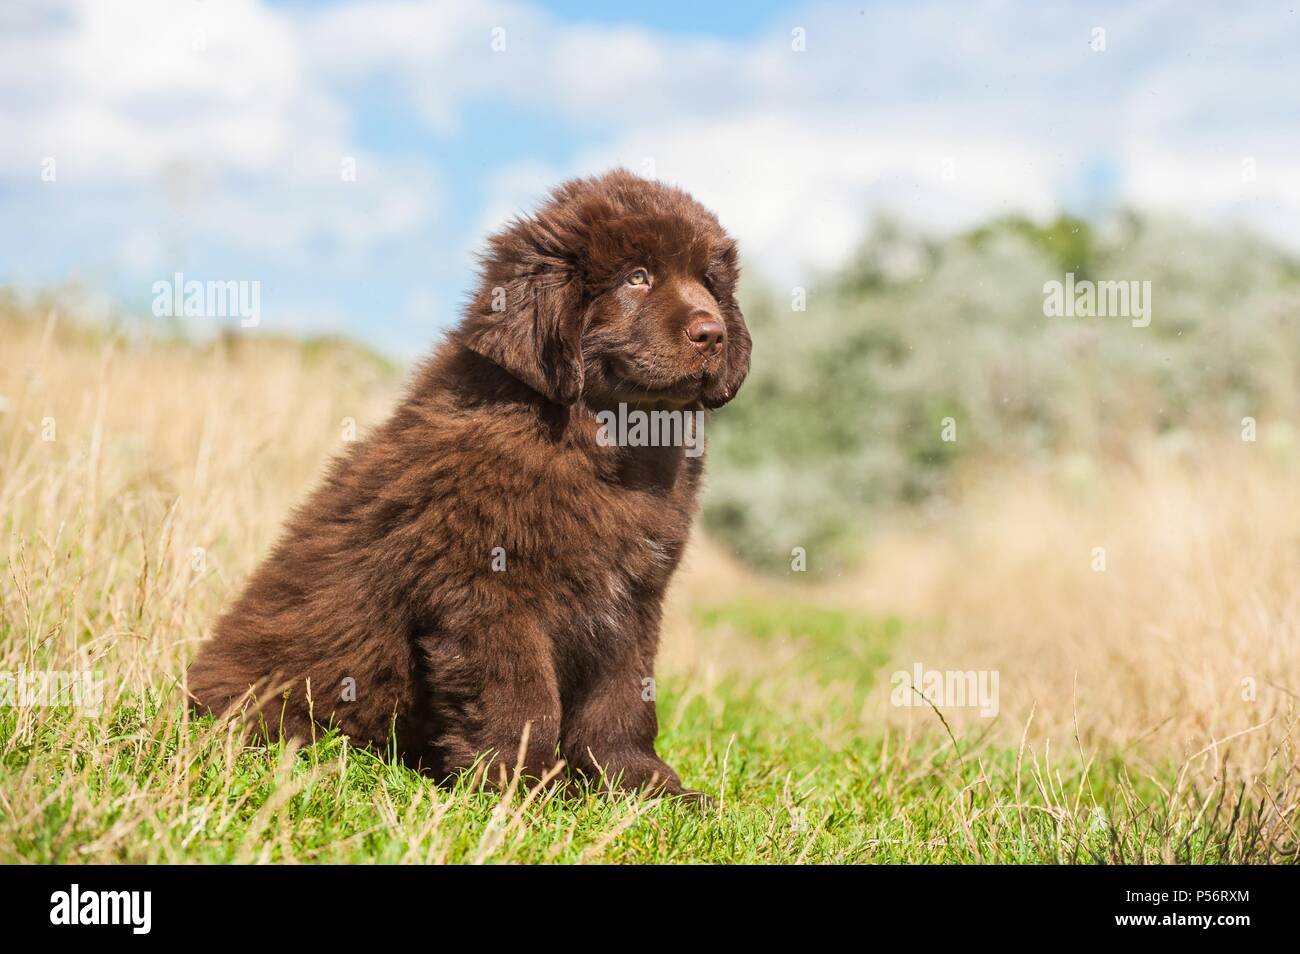 Newfoundland Puppy High Resolution Stock Photography and Images - Alamy